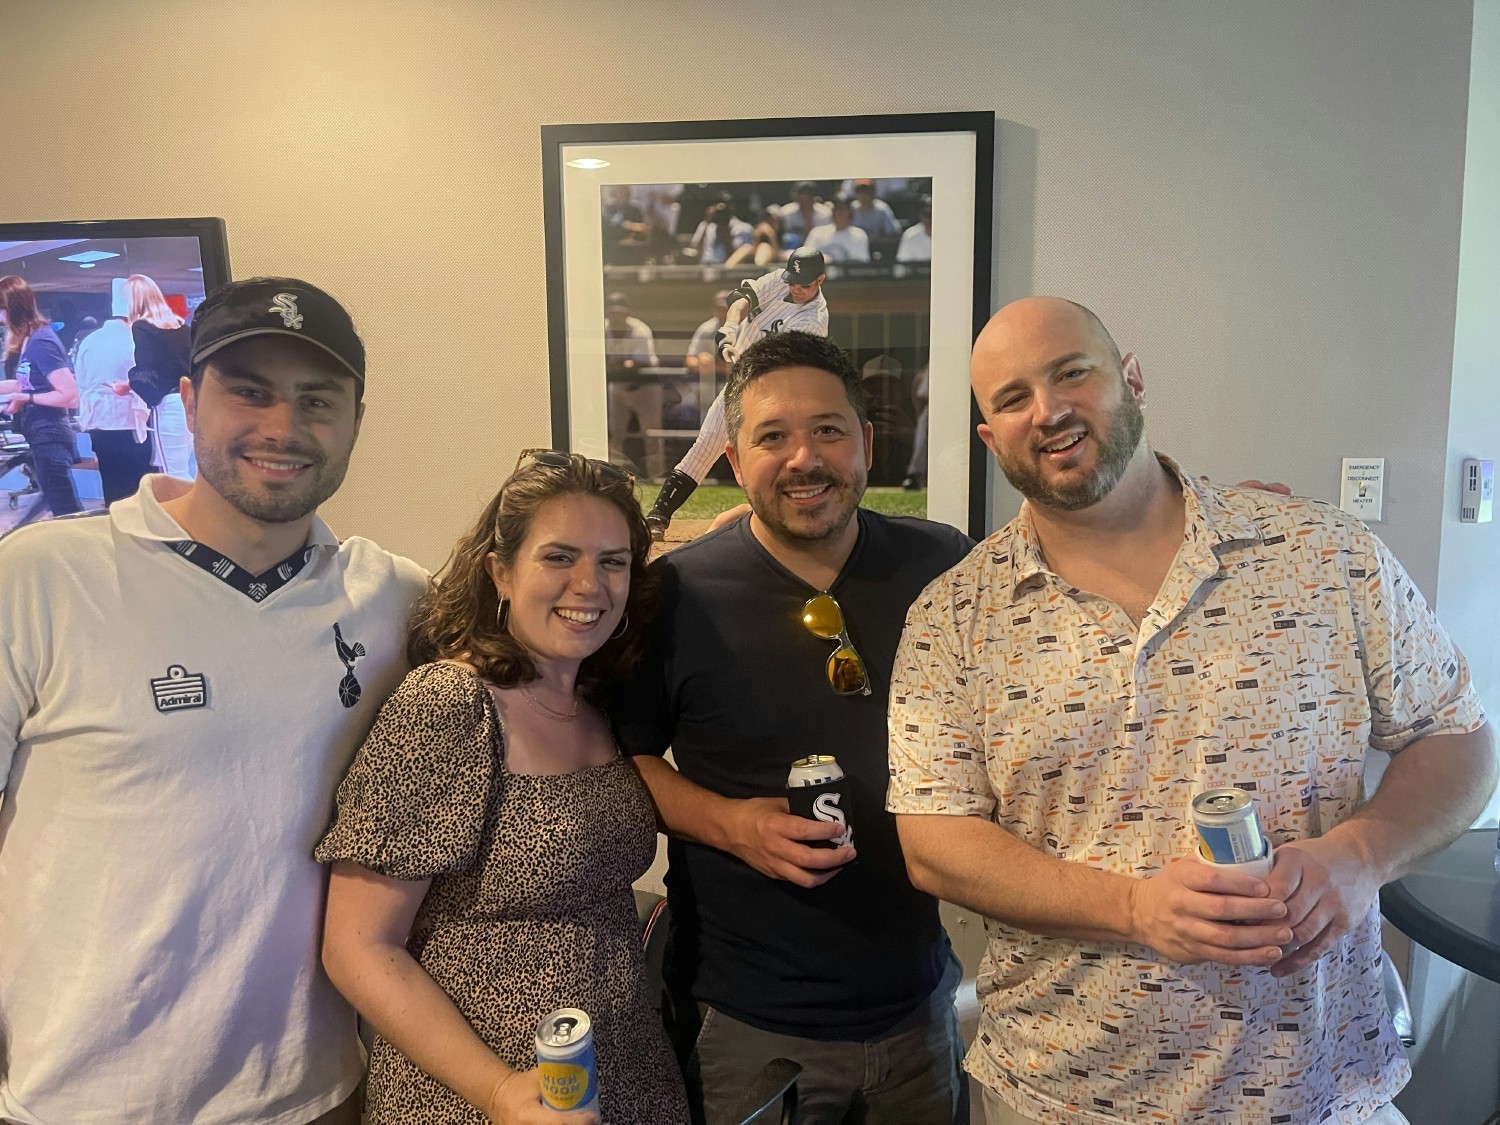 LMG's 2023 Summer: Team cheered at a White Sox game, bonding over baseball in a show of unity and fun!